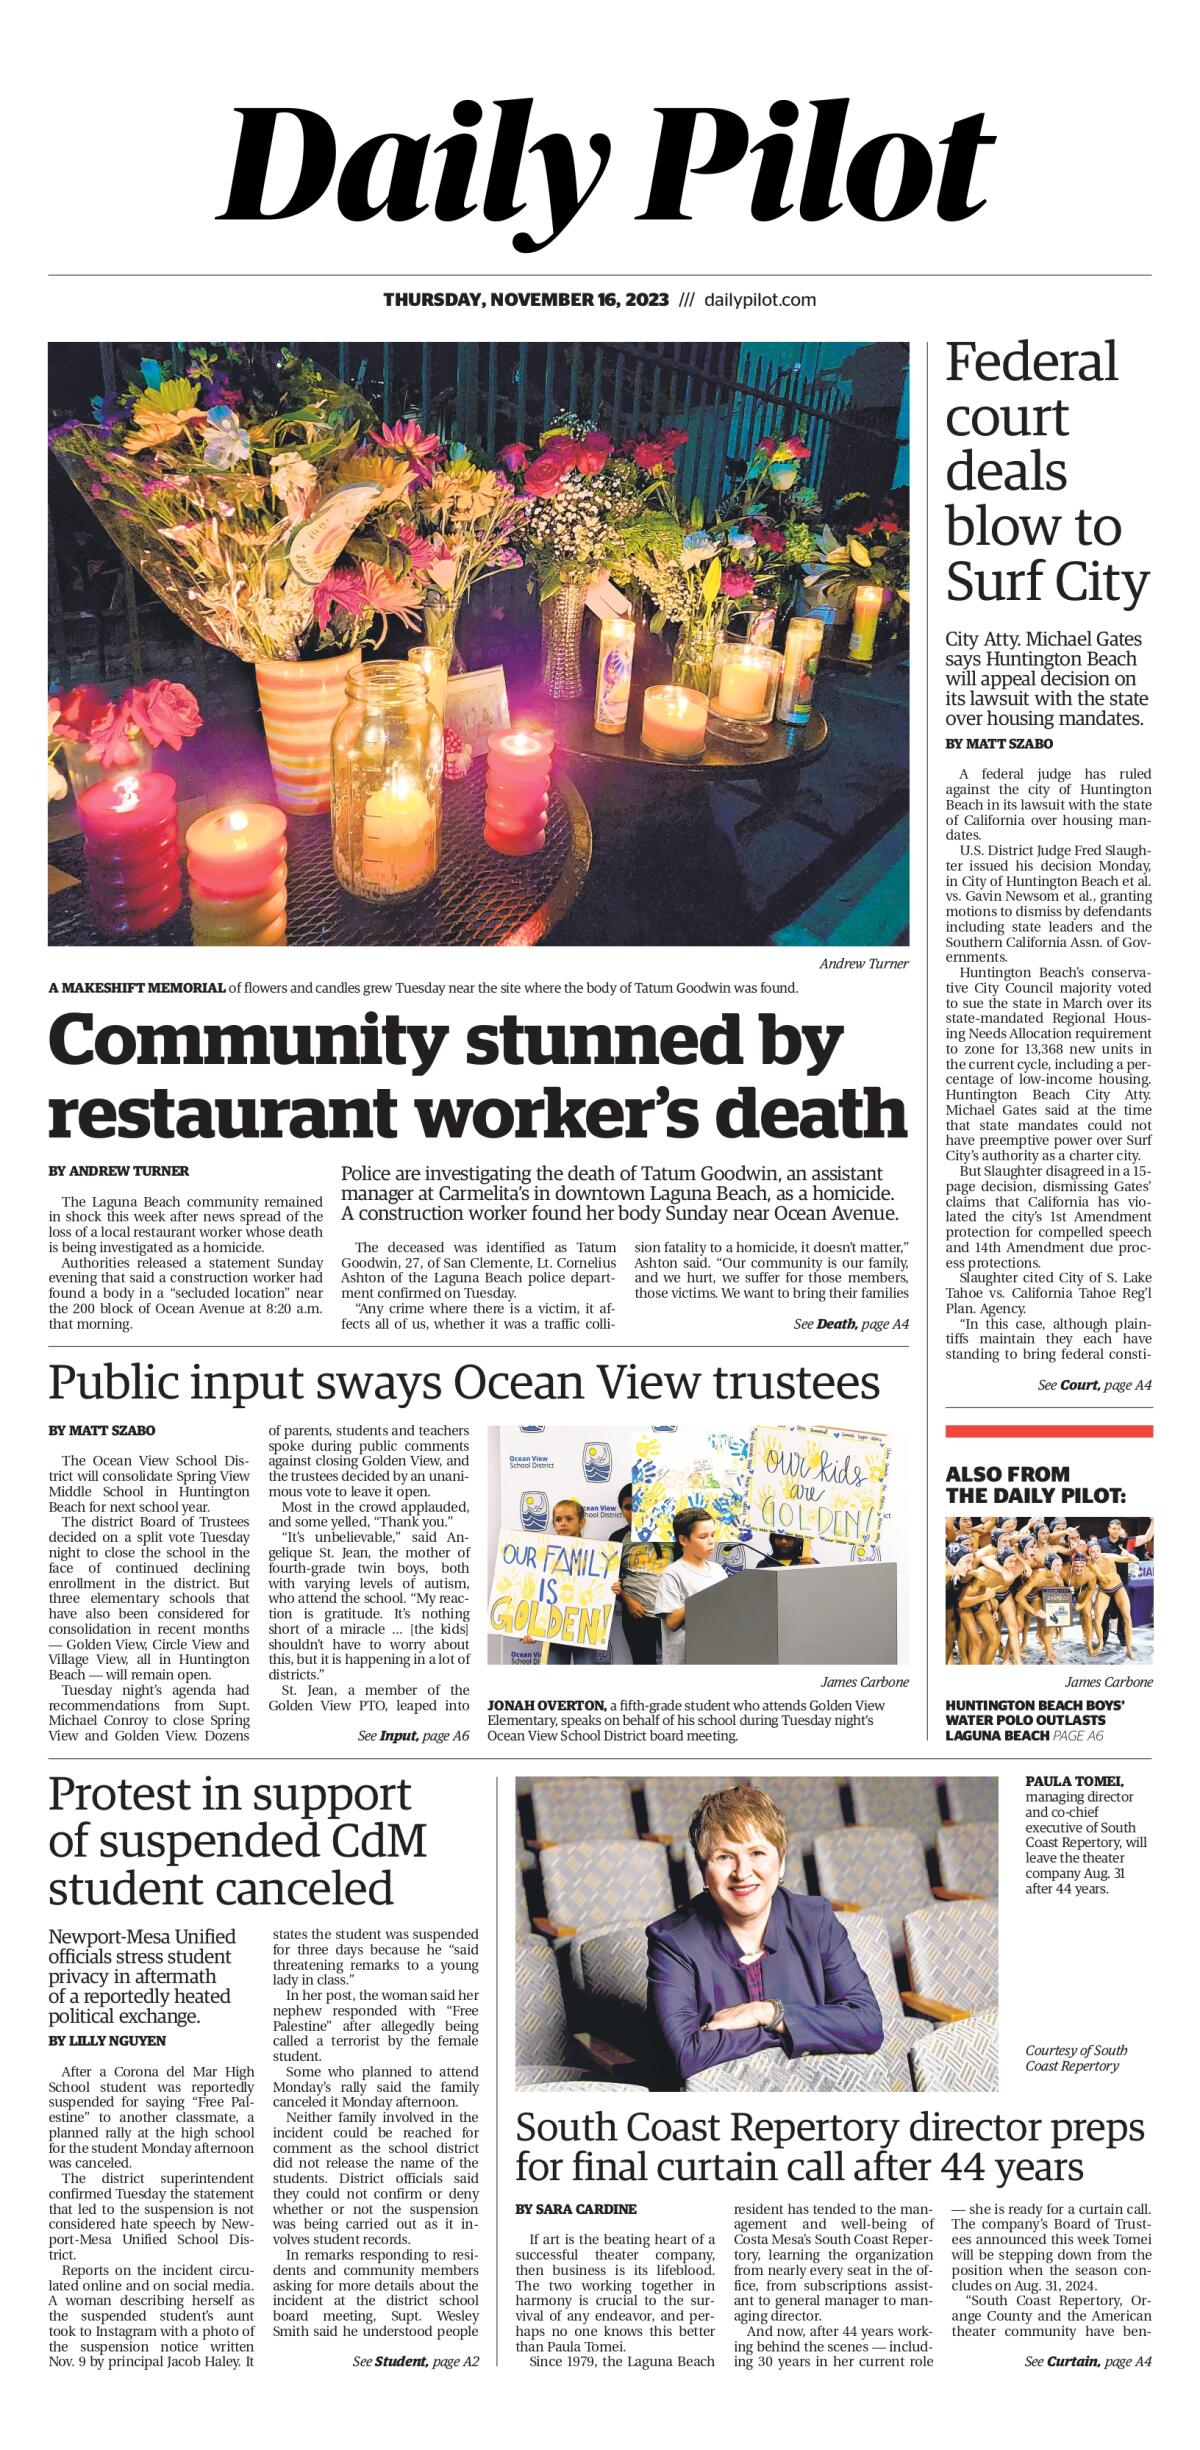 Front page of the Daily Pilot e-newspaper for Thursday, Nov. 16, 2023.